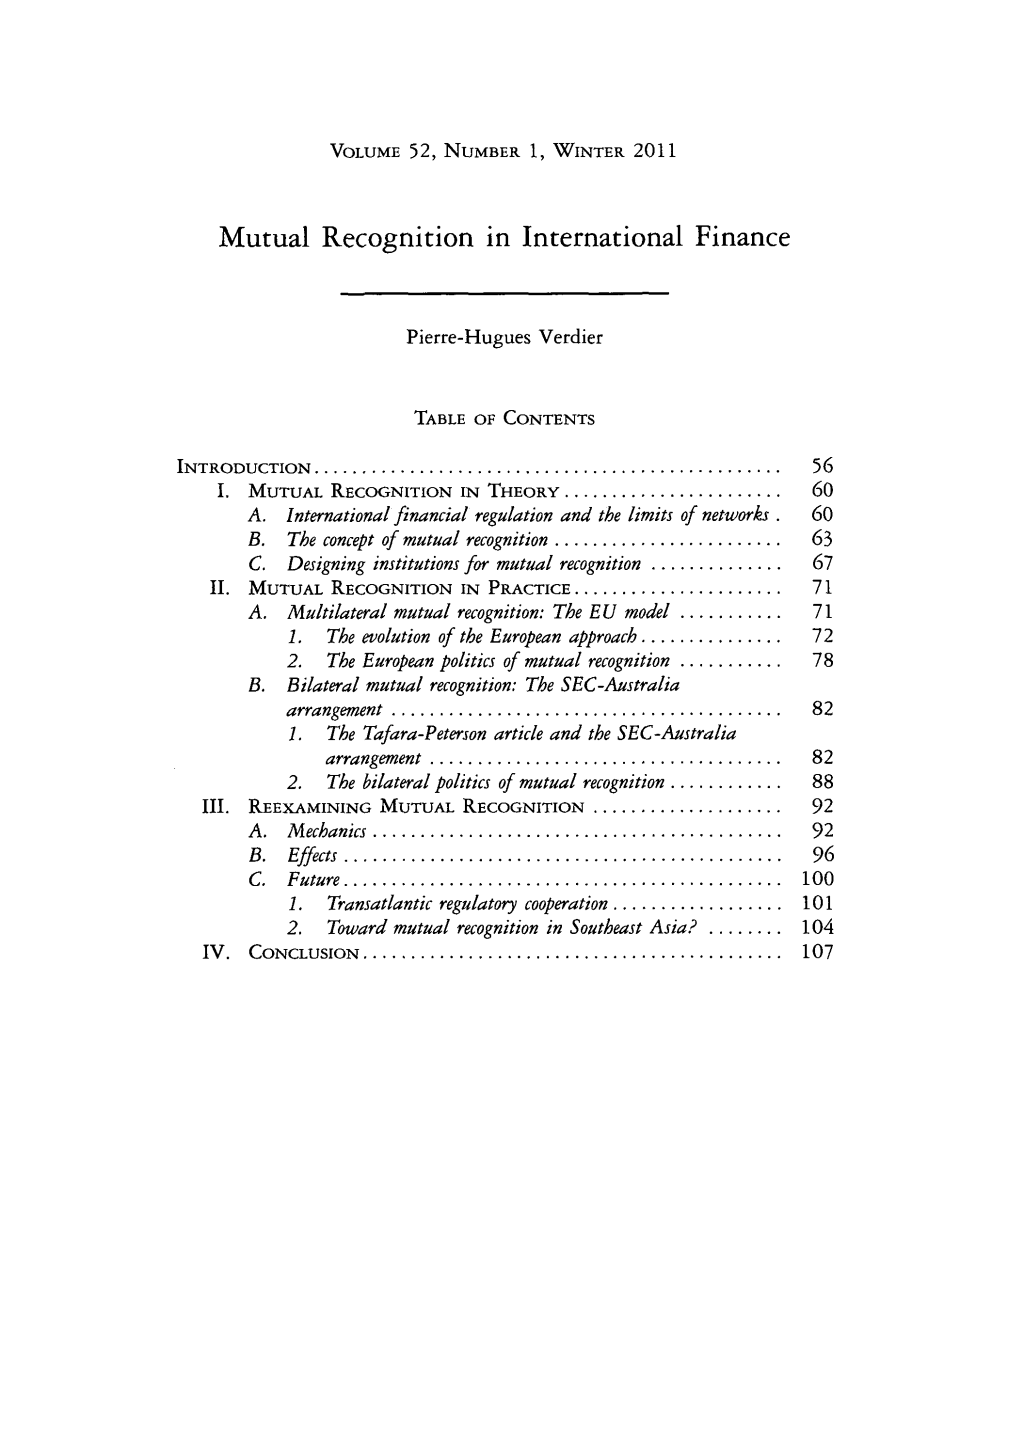 Mutual Recognition in International Finance